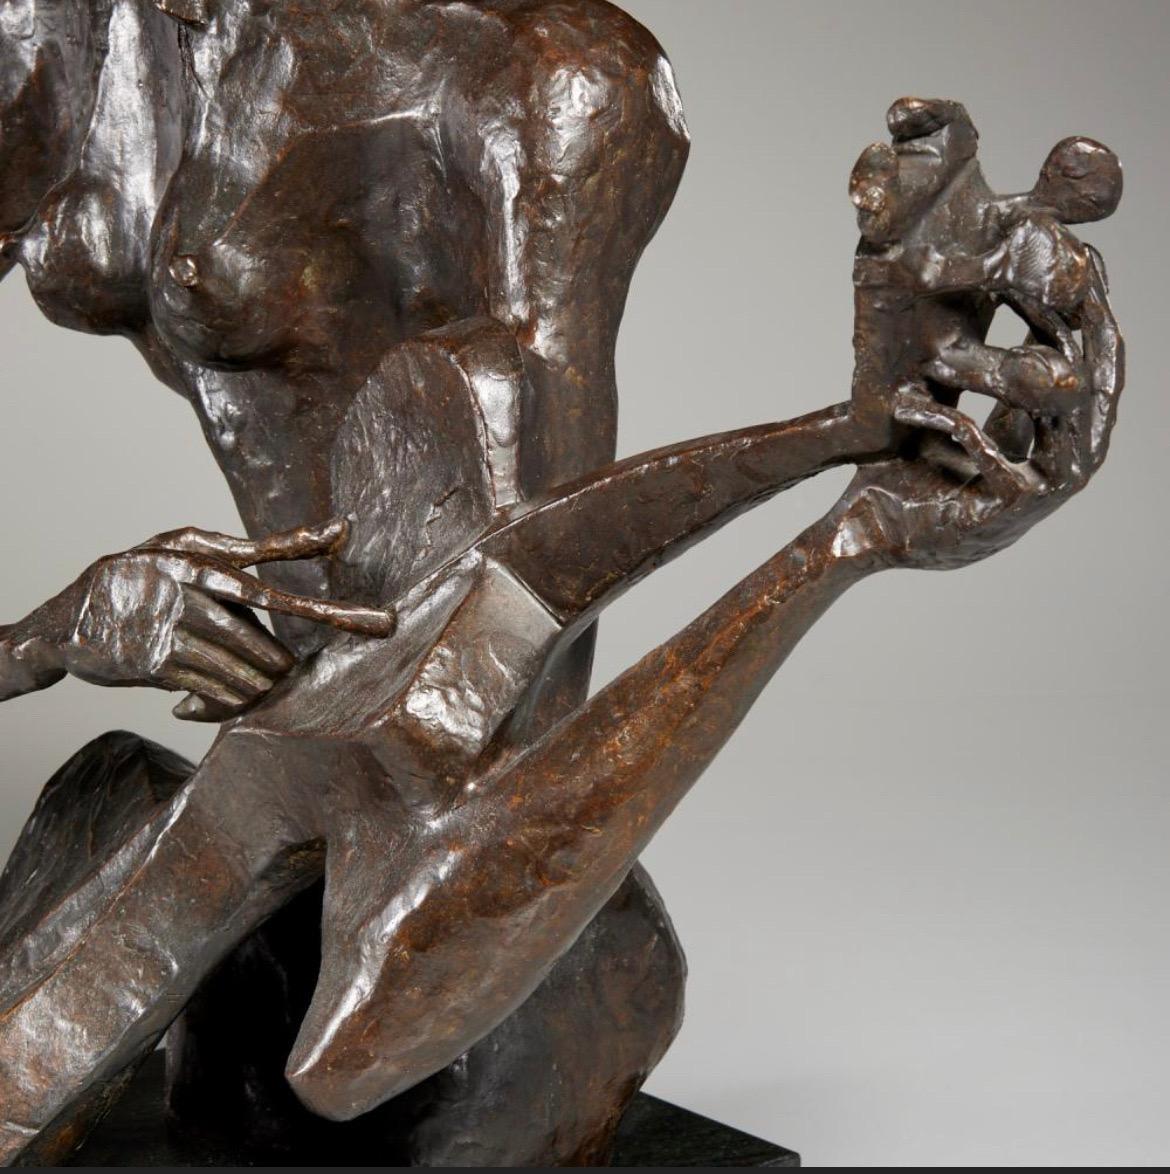 Bronze sculpture of a musician by Nathaniel Kaz, signed and dated 1952. Measures 23” x 10” x 19” including the plinth base.

Nathan Katz was born in the Bronx, NY in 1917, and he died in 2010 with work in the permanent collections of the